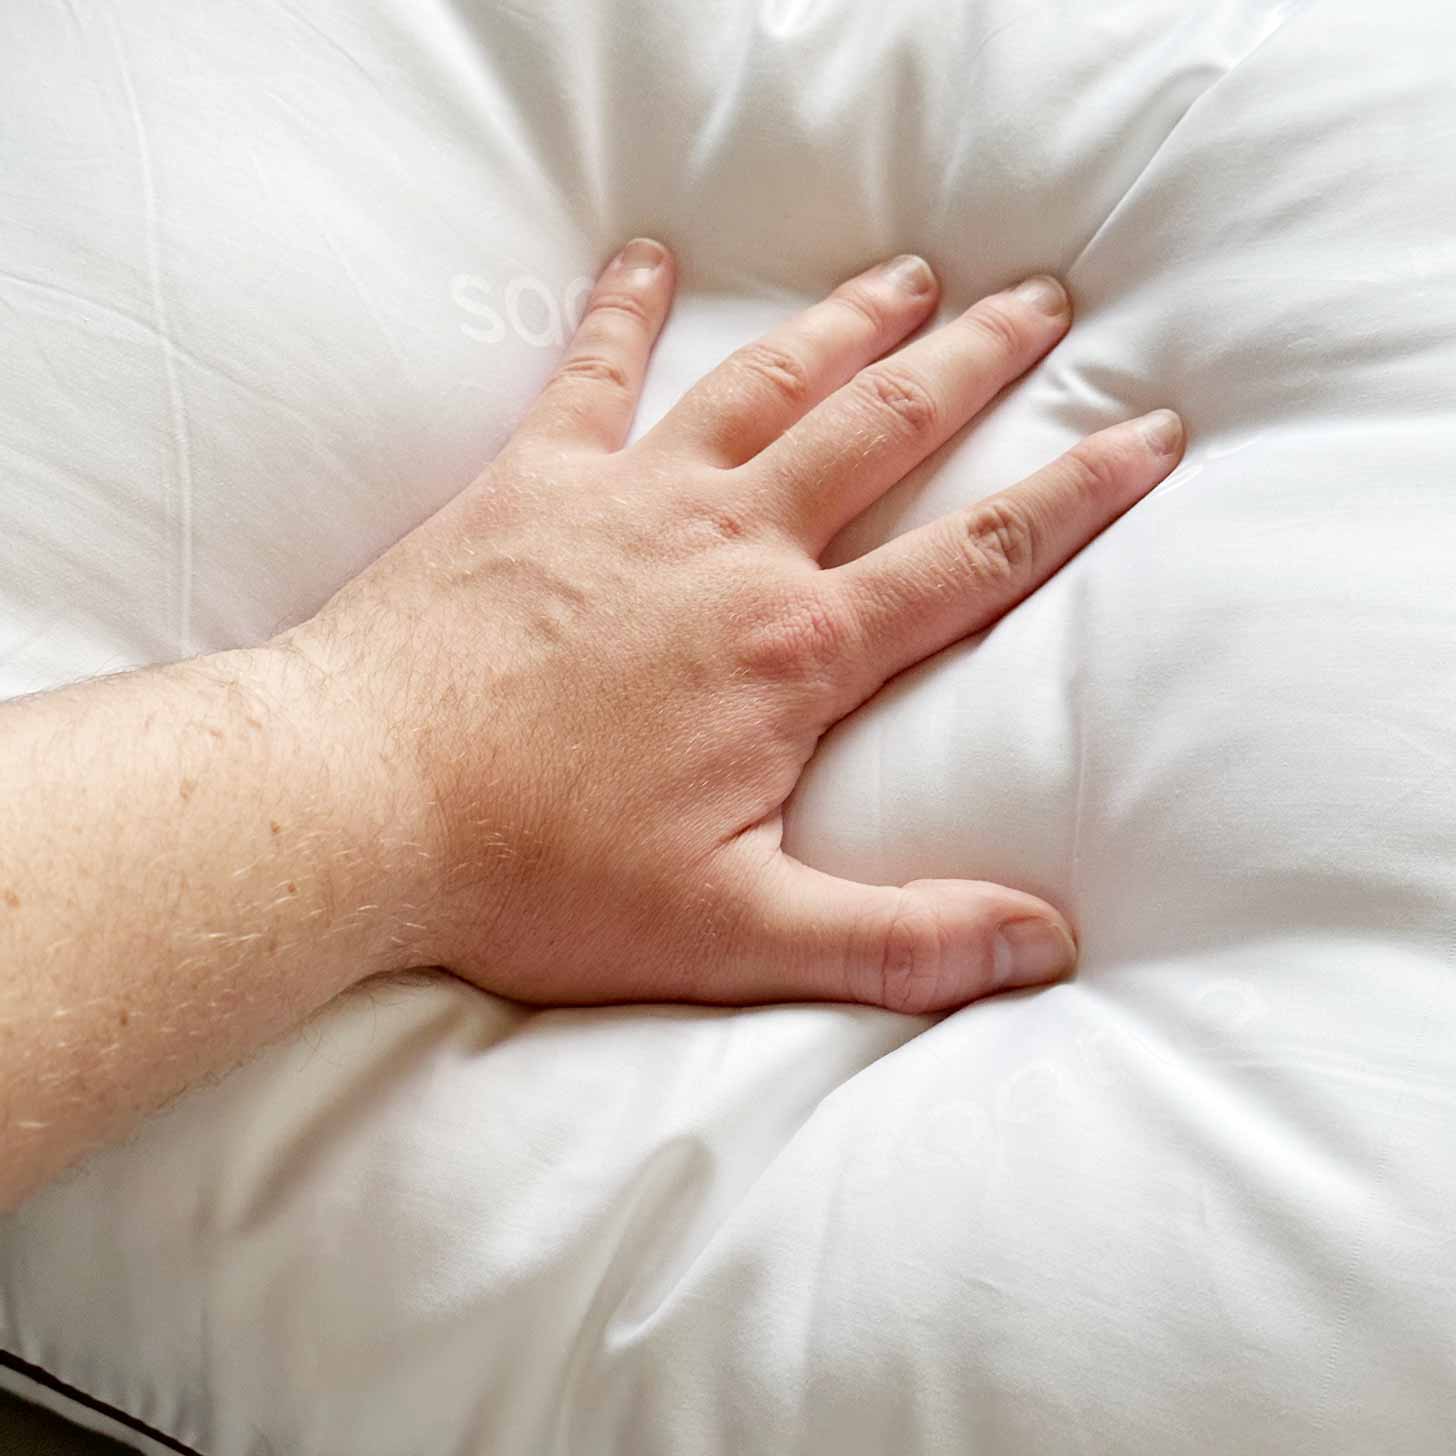 A hand pushing into Saatva pillows to show how soft yet firm they are